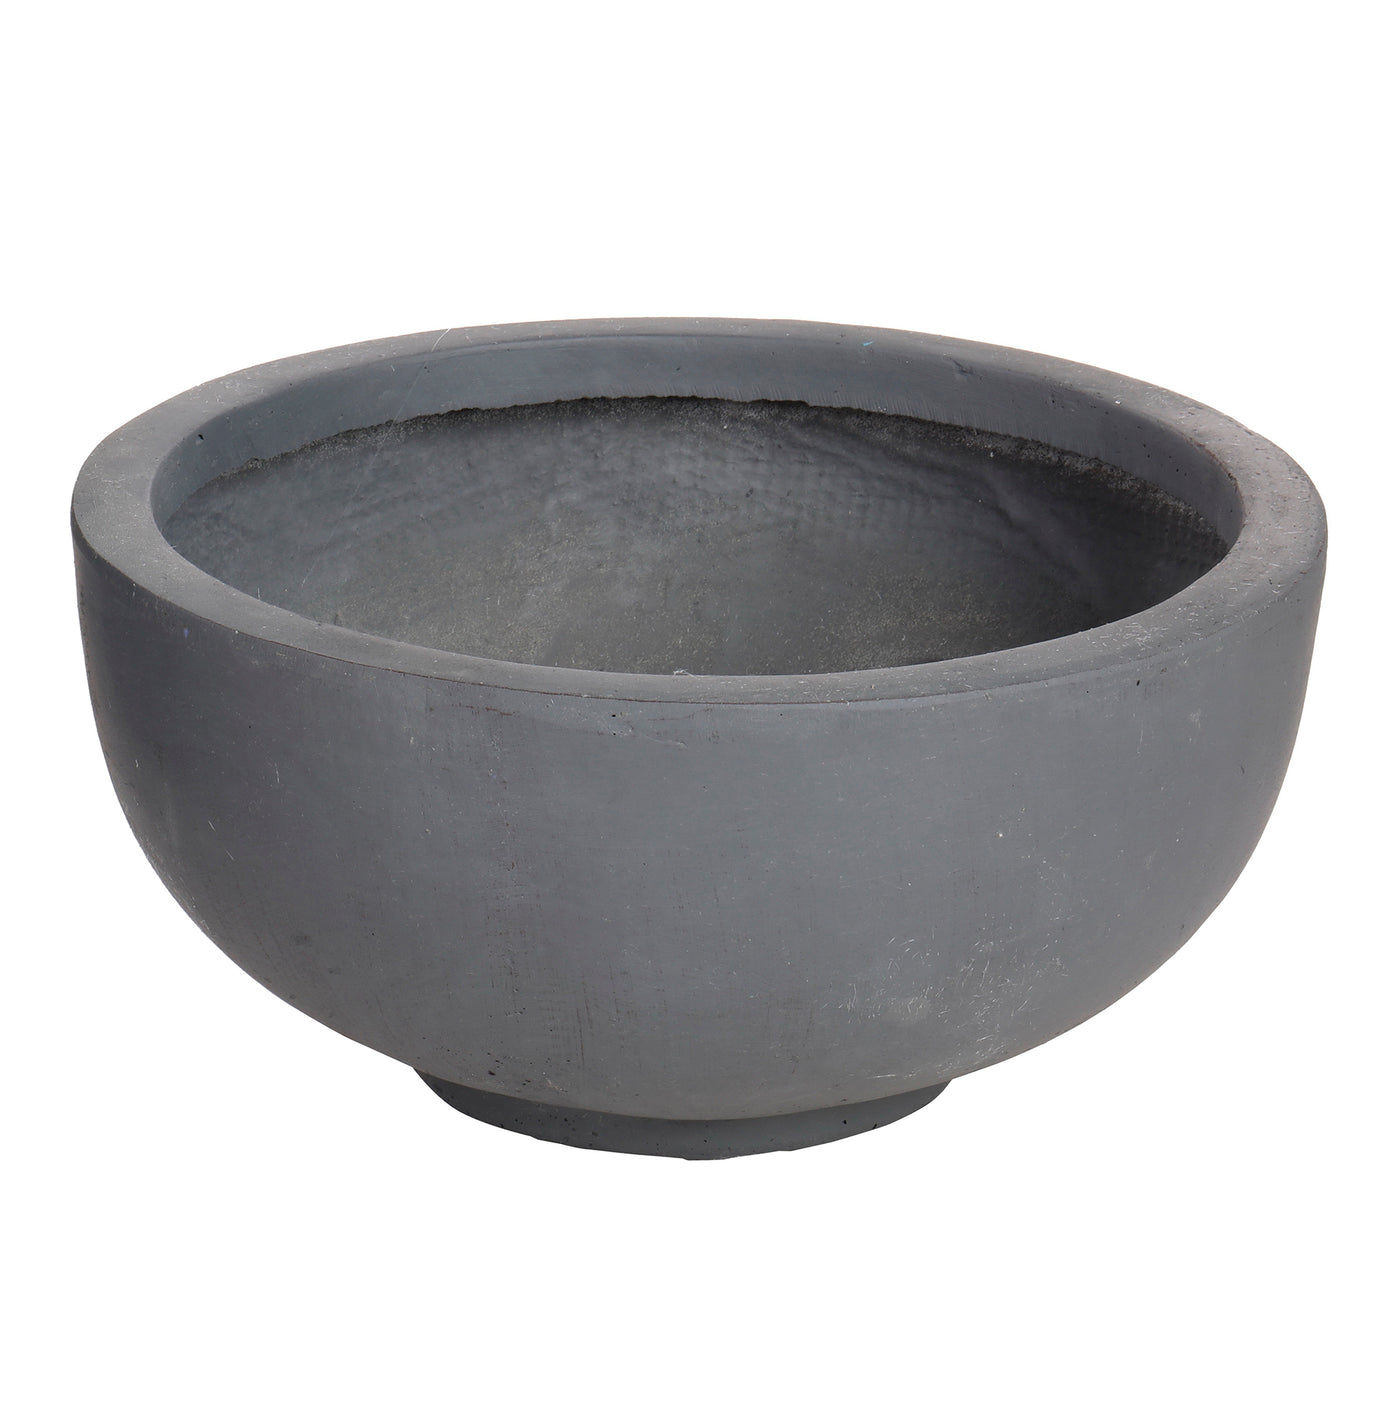 Finest quality stoneware bowl planter in charcoal dark gray